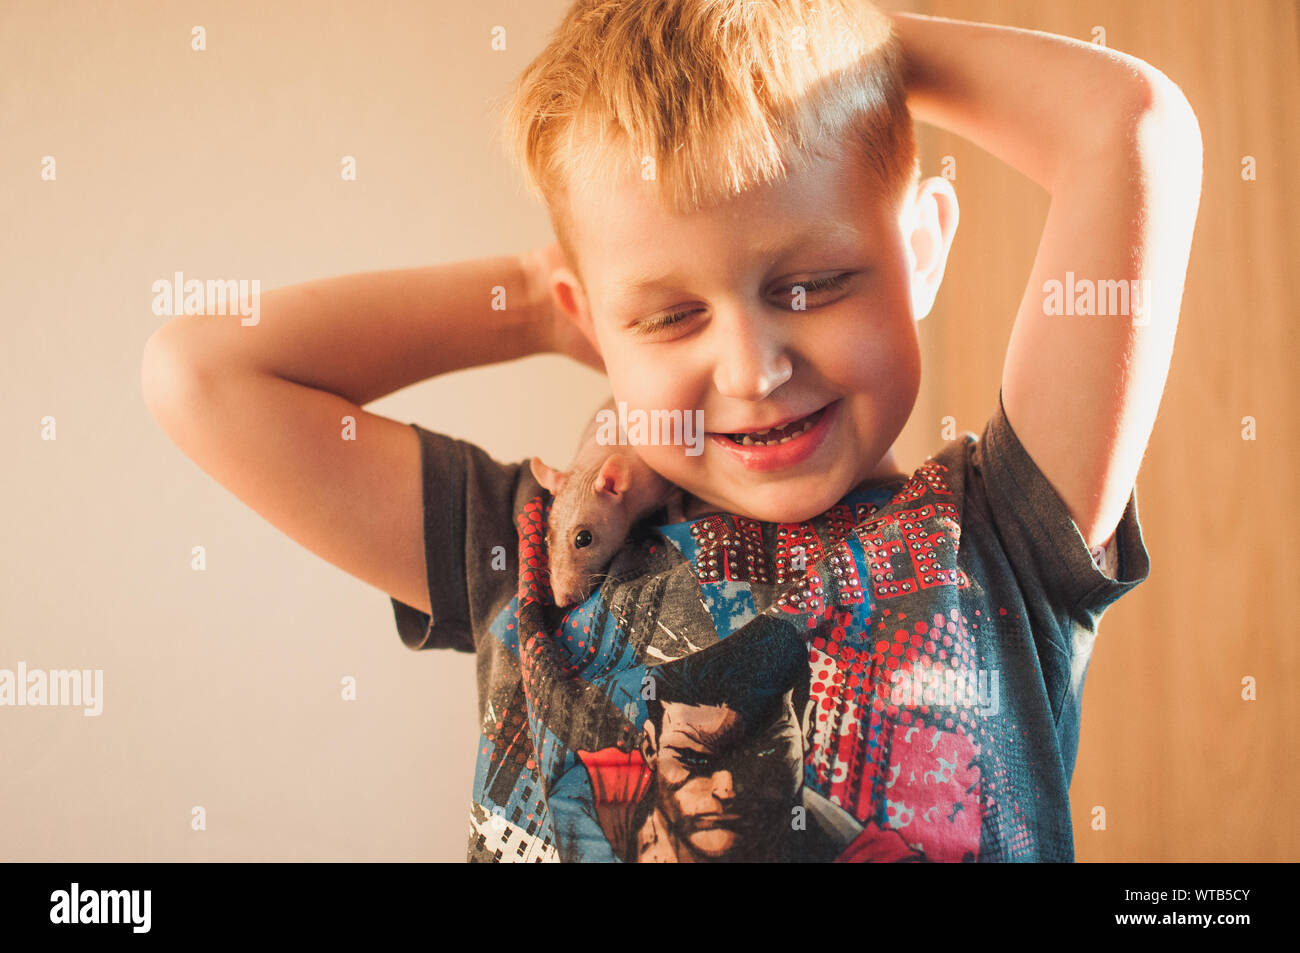 LOS ANGELES, CA, USA - AUGUST 28, 2019: A 5 year old child plays with a rat sphinx. A bald rat sits on a child s shoulder, illustrative editorial Stock Photo